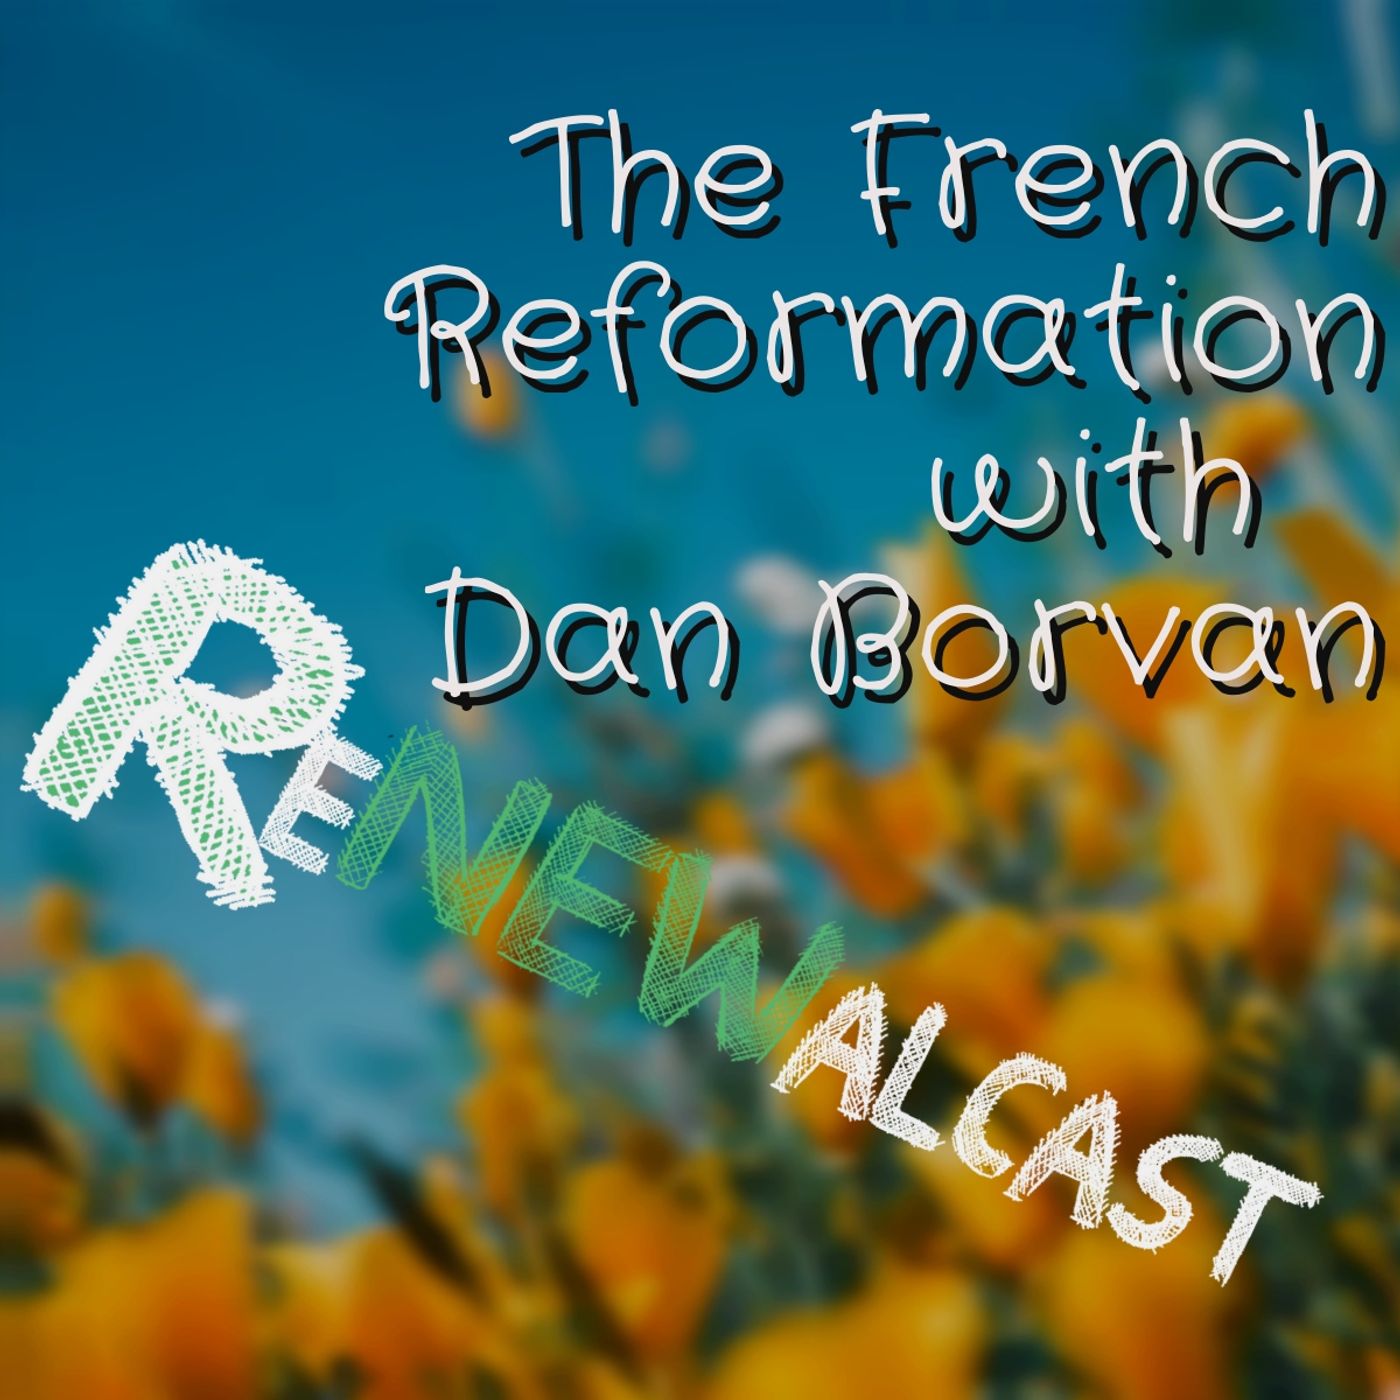 The French Reformation with Dan Borvan